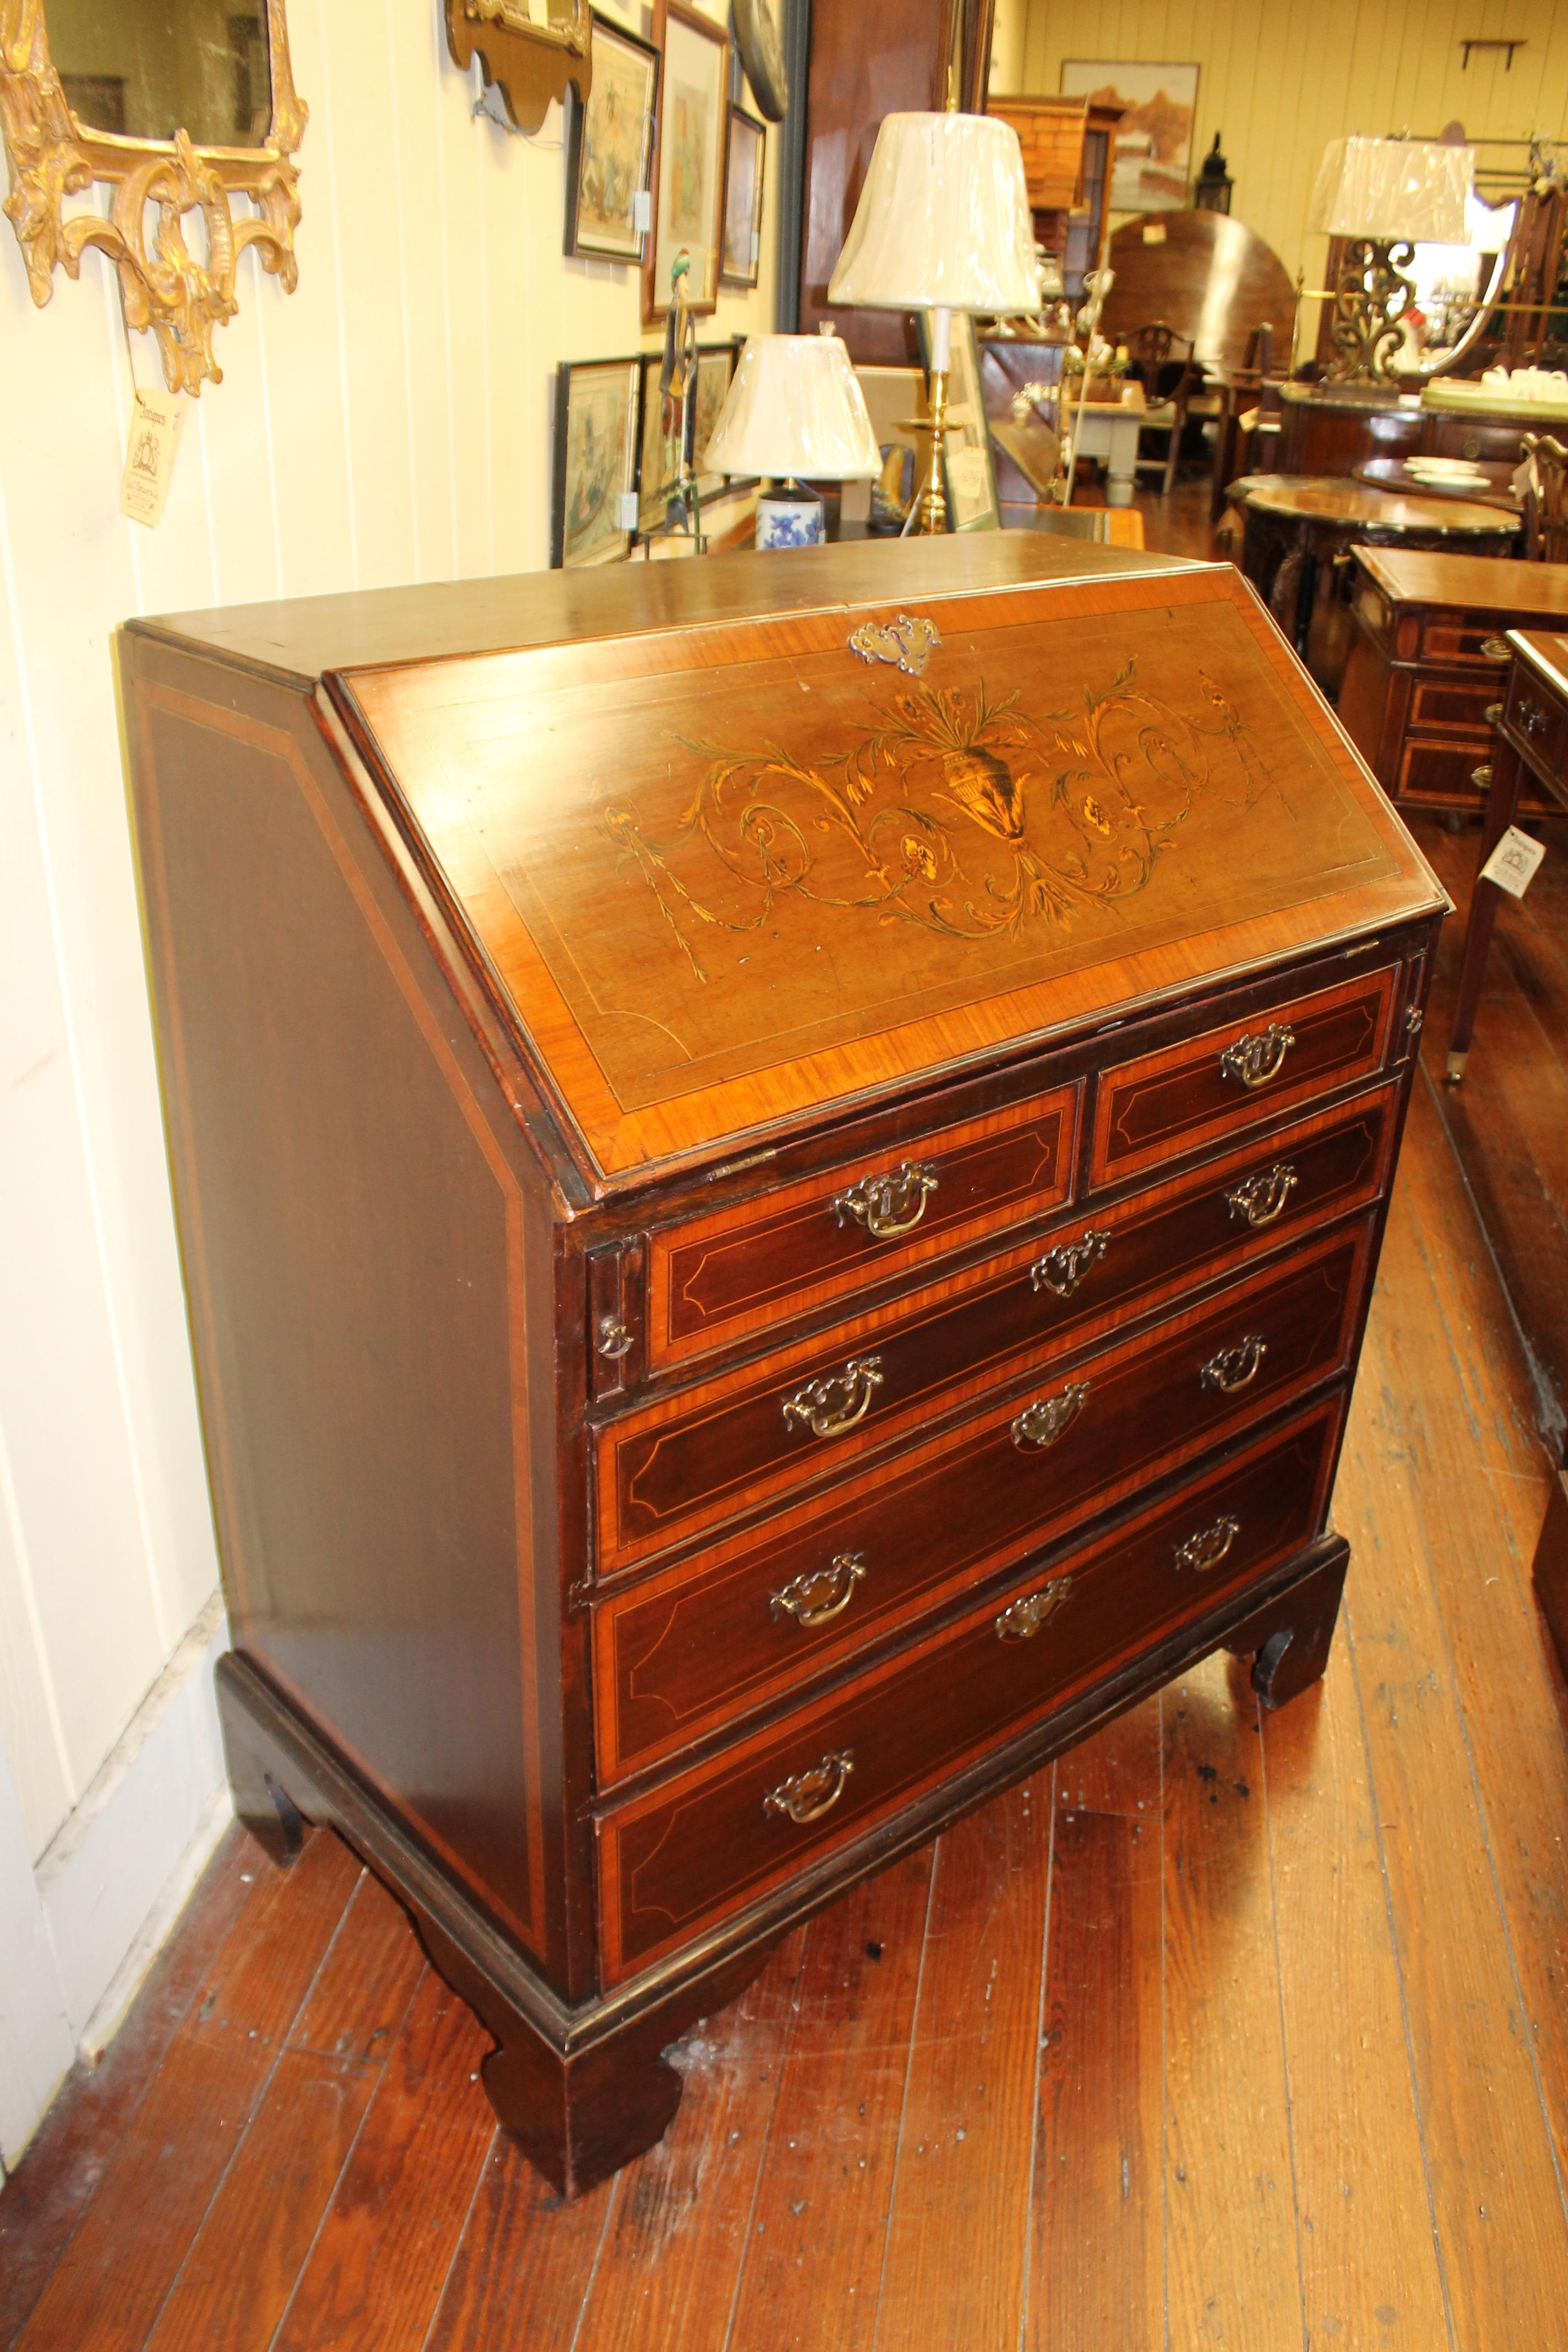 Superb quality antique English George III fabulous marquetry inlaid mahogany Chippendale style slant-front bureau with an 